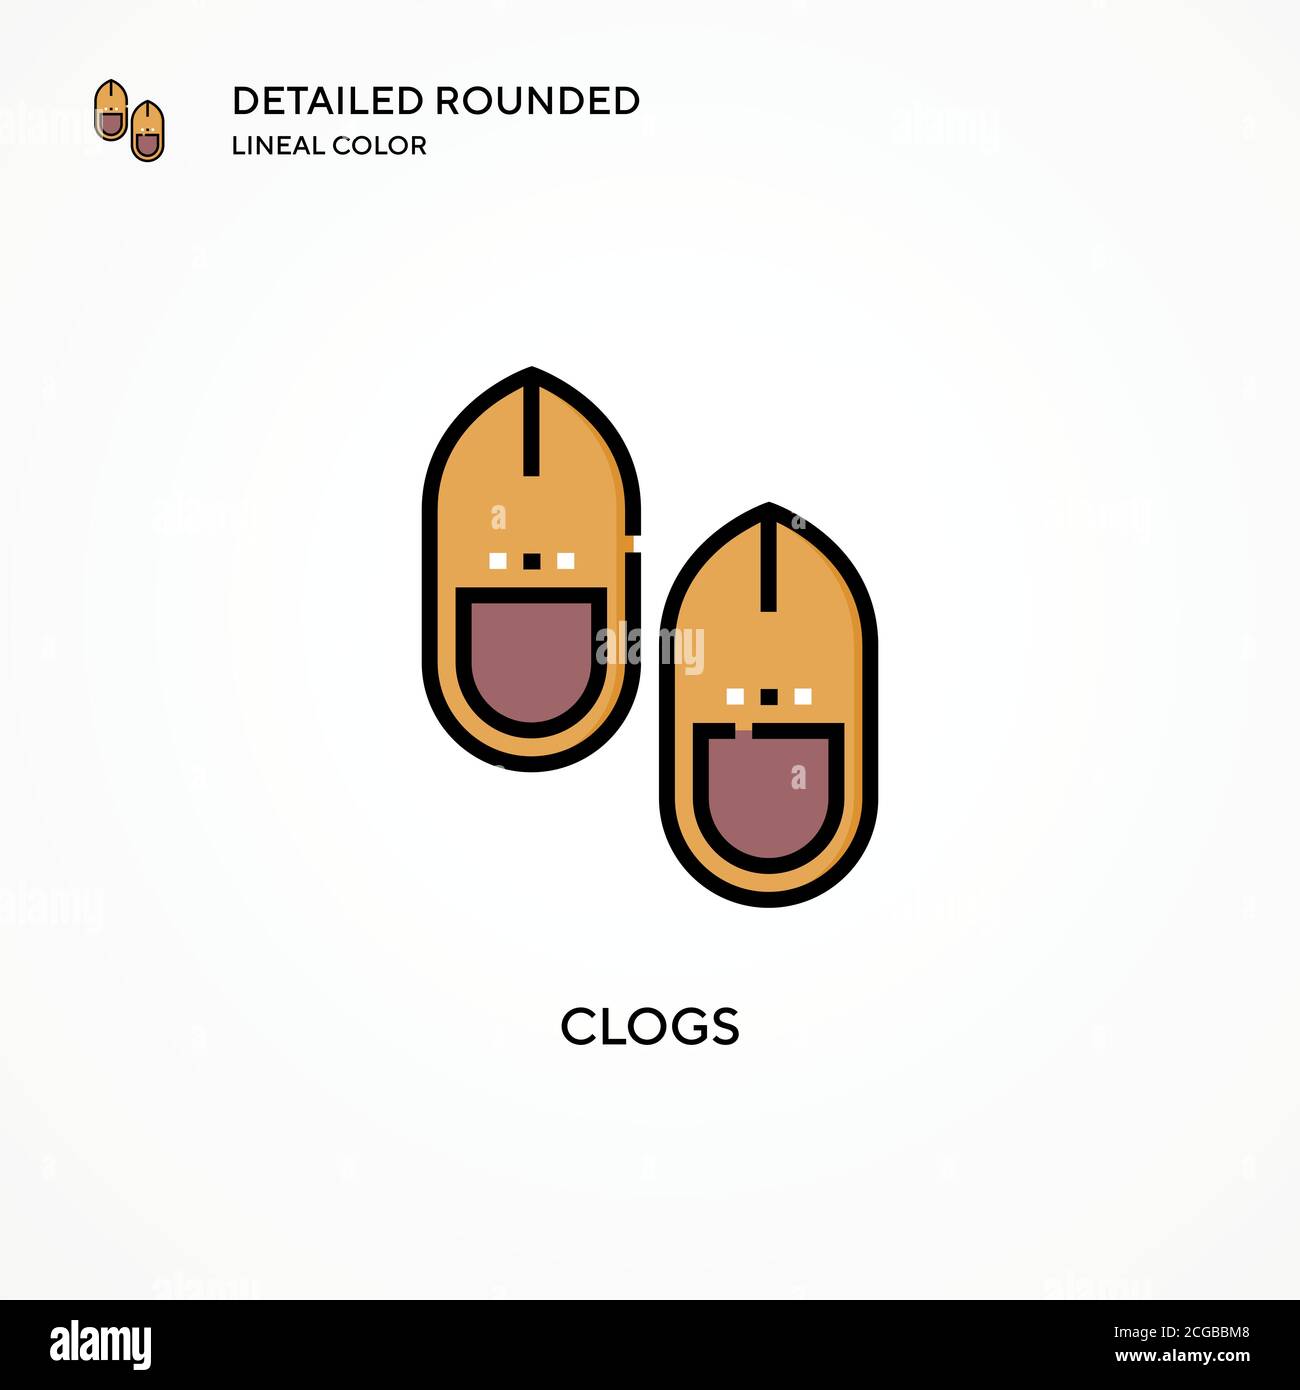 Clogs vector icon. Modern vector illustration concepts. Easy to edit and customize. Stock Vector